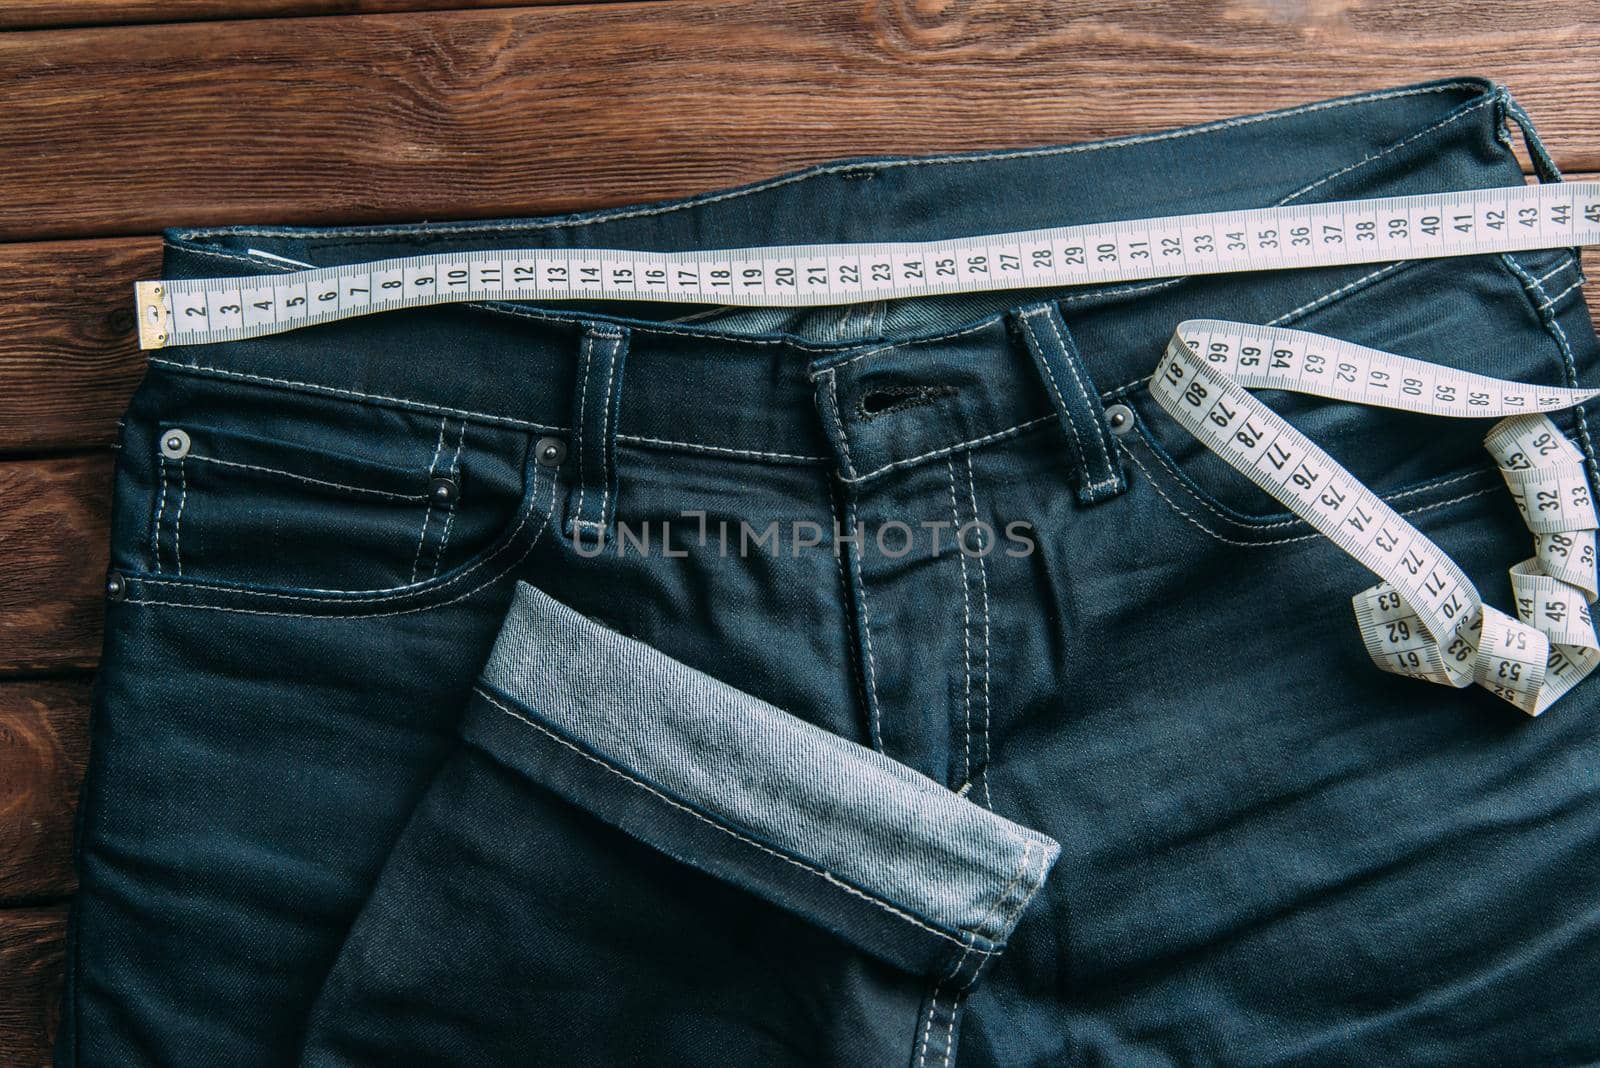 Jeans pants and measuring tape on a wooden background, top view.